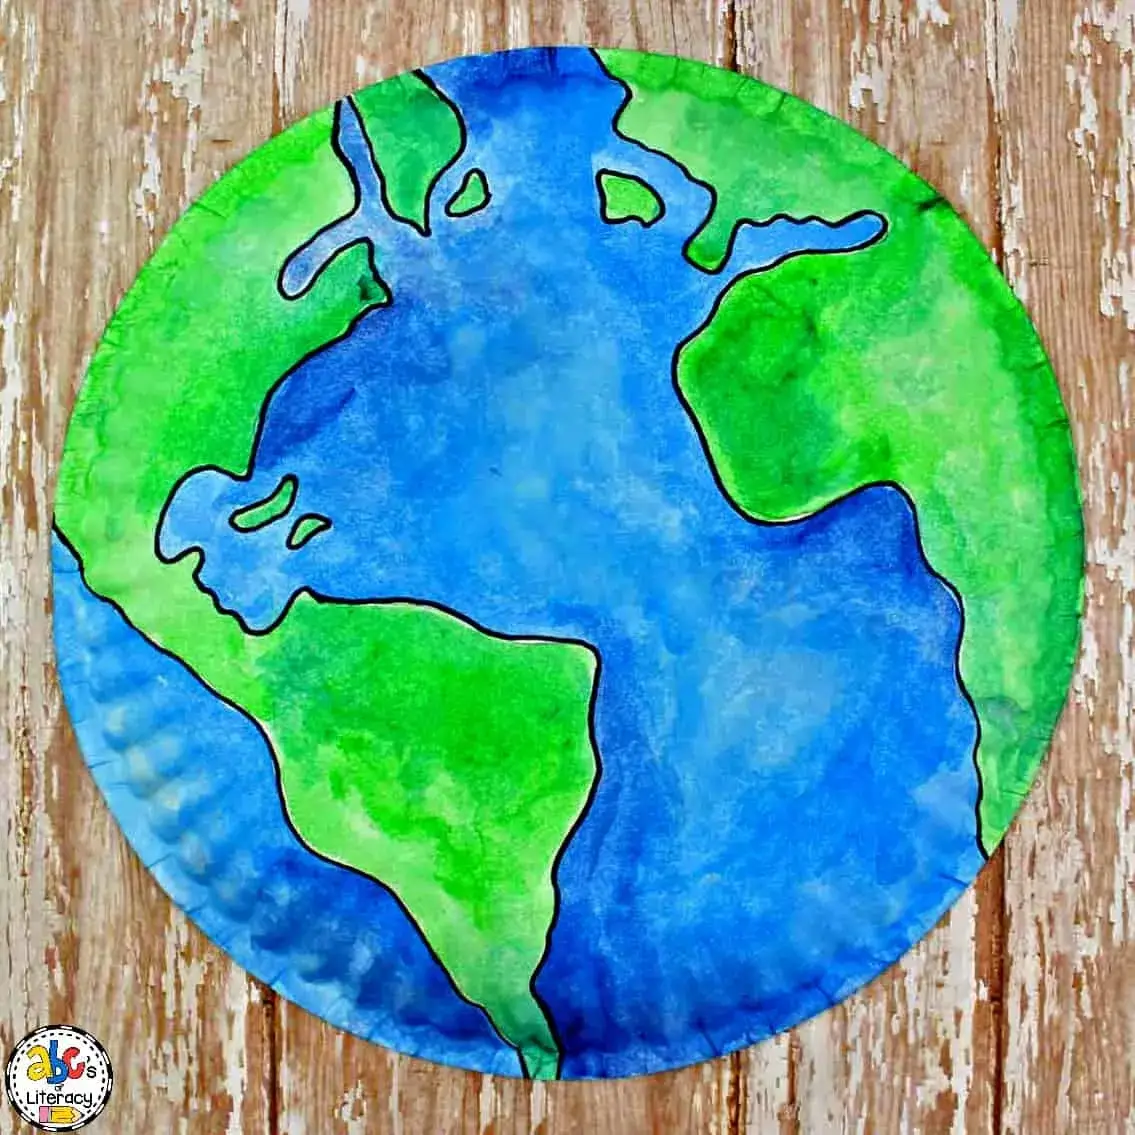 DIY Paper Planet International Earth Day Craft Project for Kindergarten